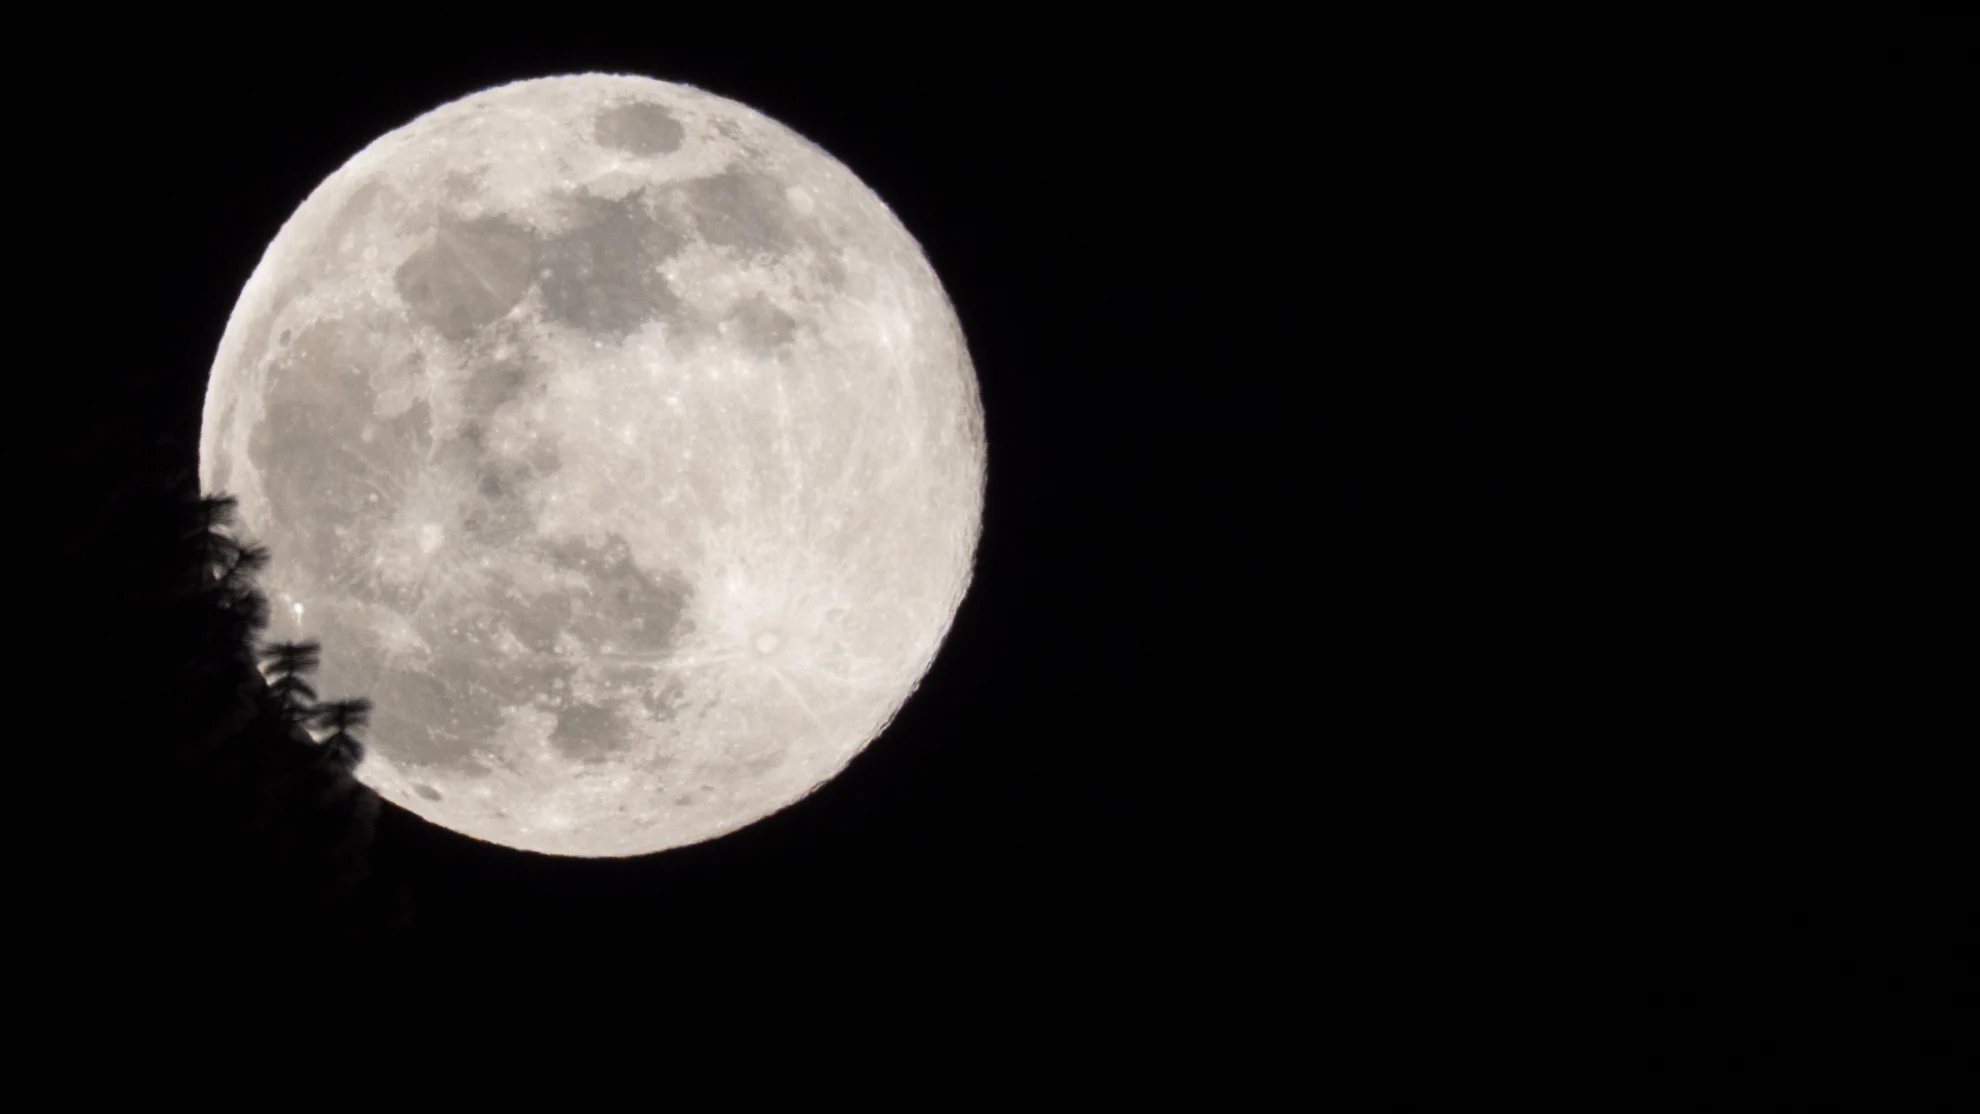 Why is the 'Supermoon' so compelling to us?